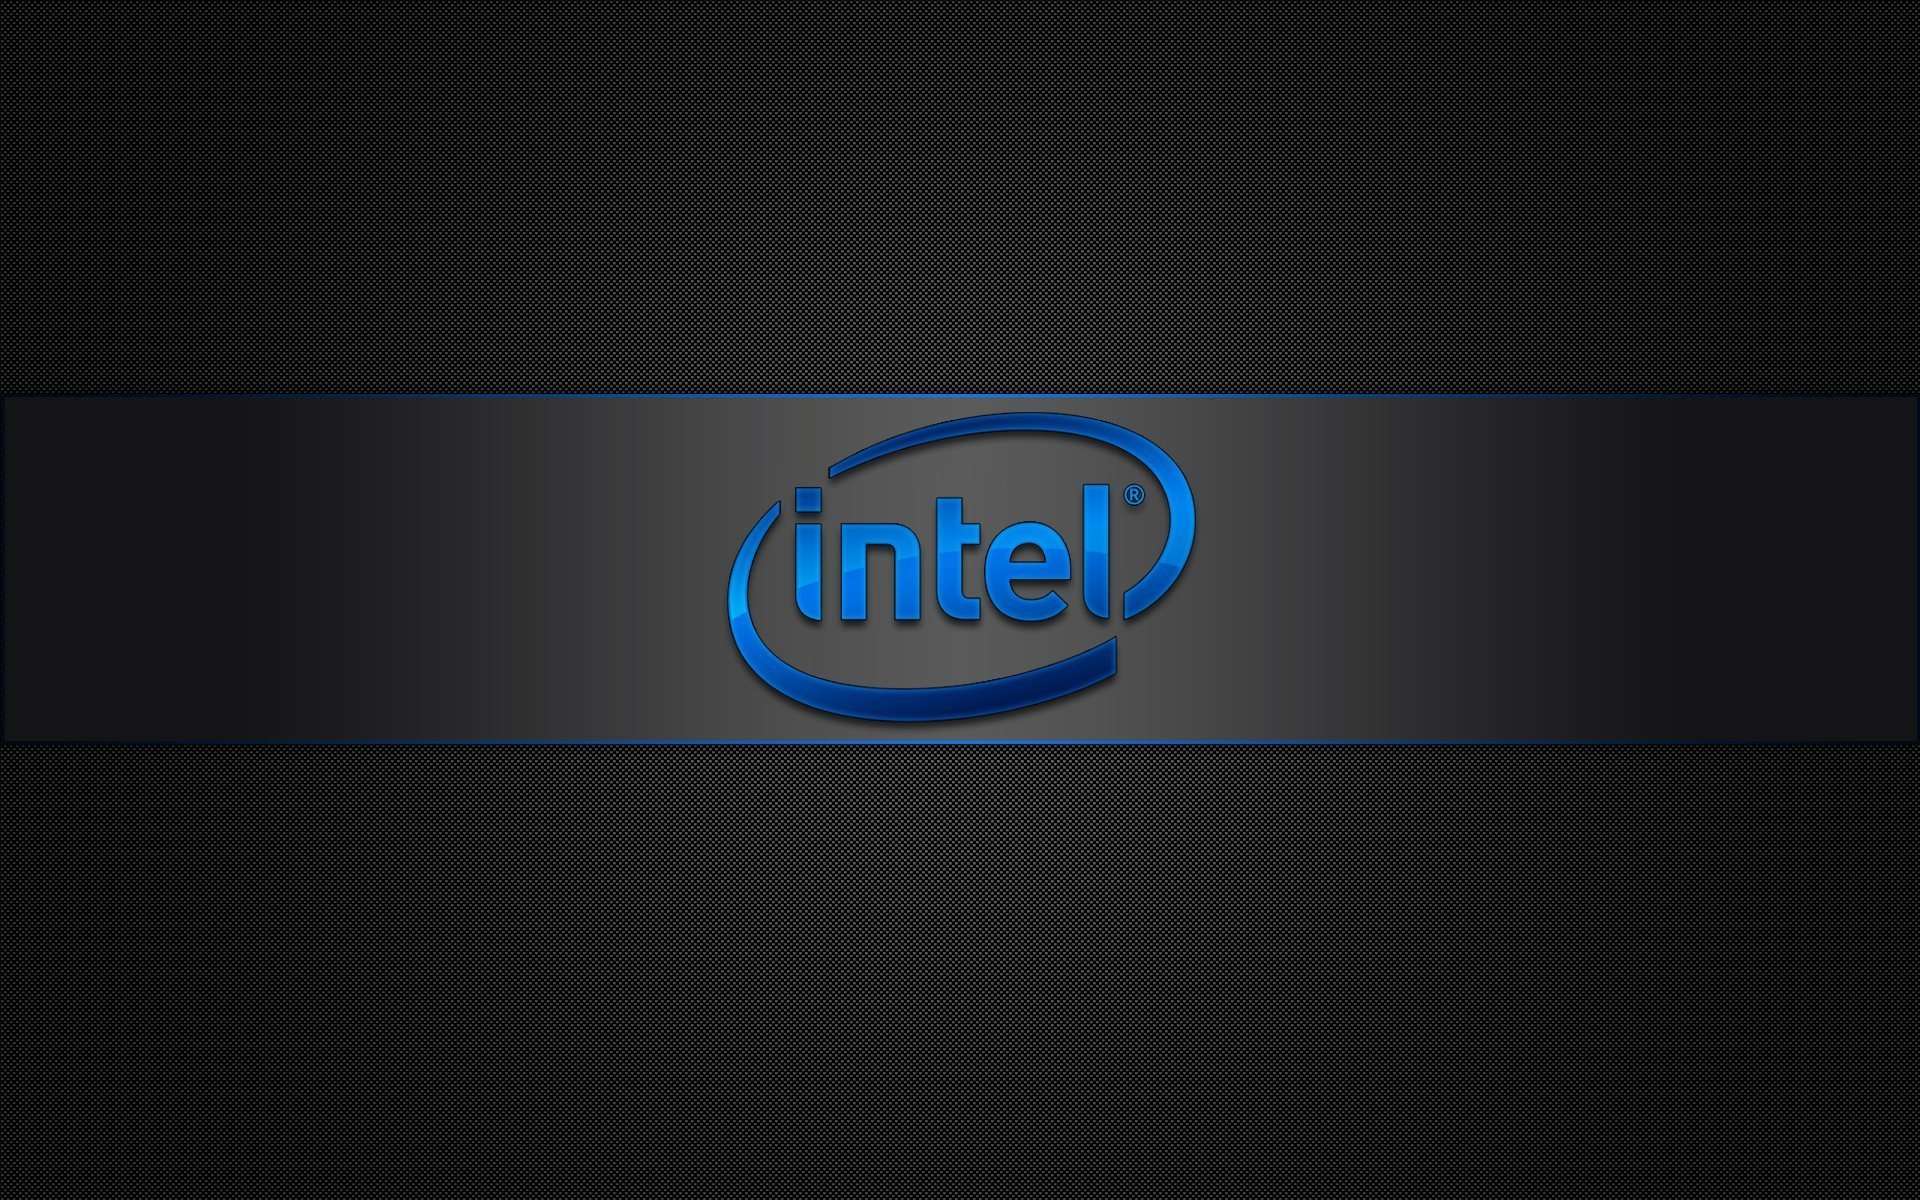 Intel Backgrounds Free Download